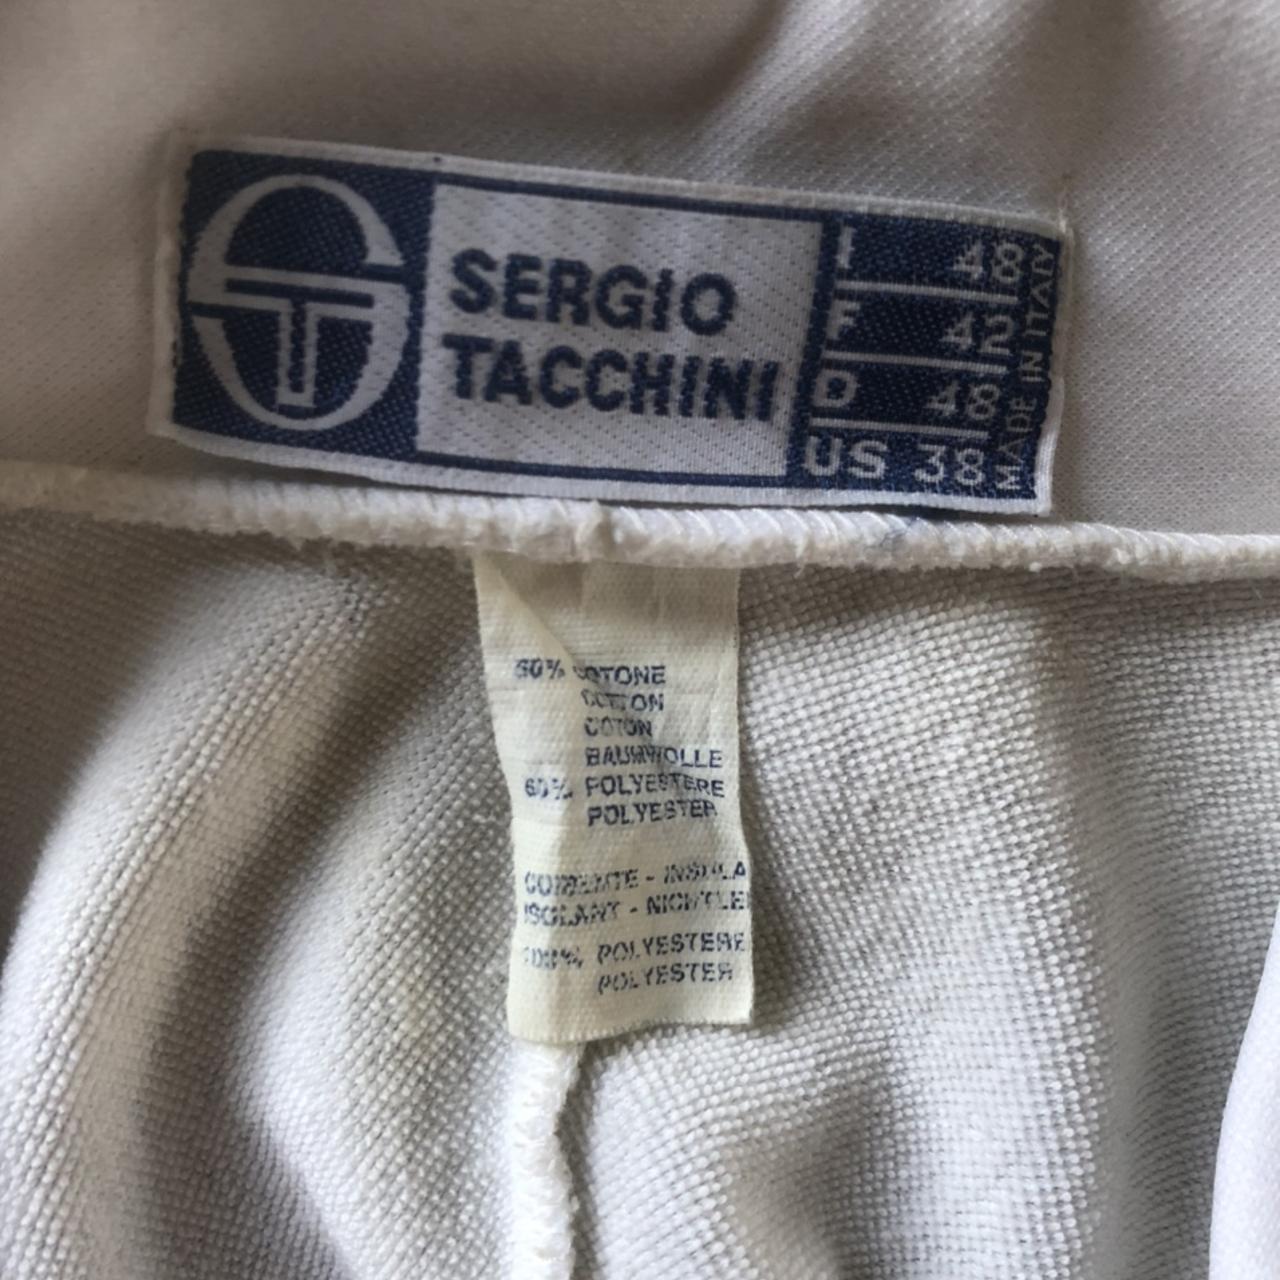 Vintage 1980s Sergio Tacchini tracksuit top, made in... - Depop